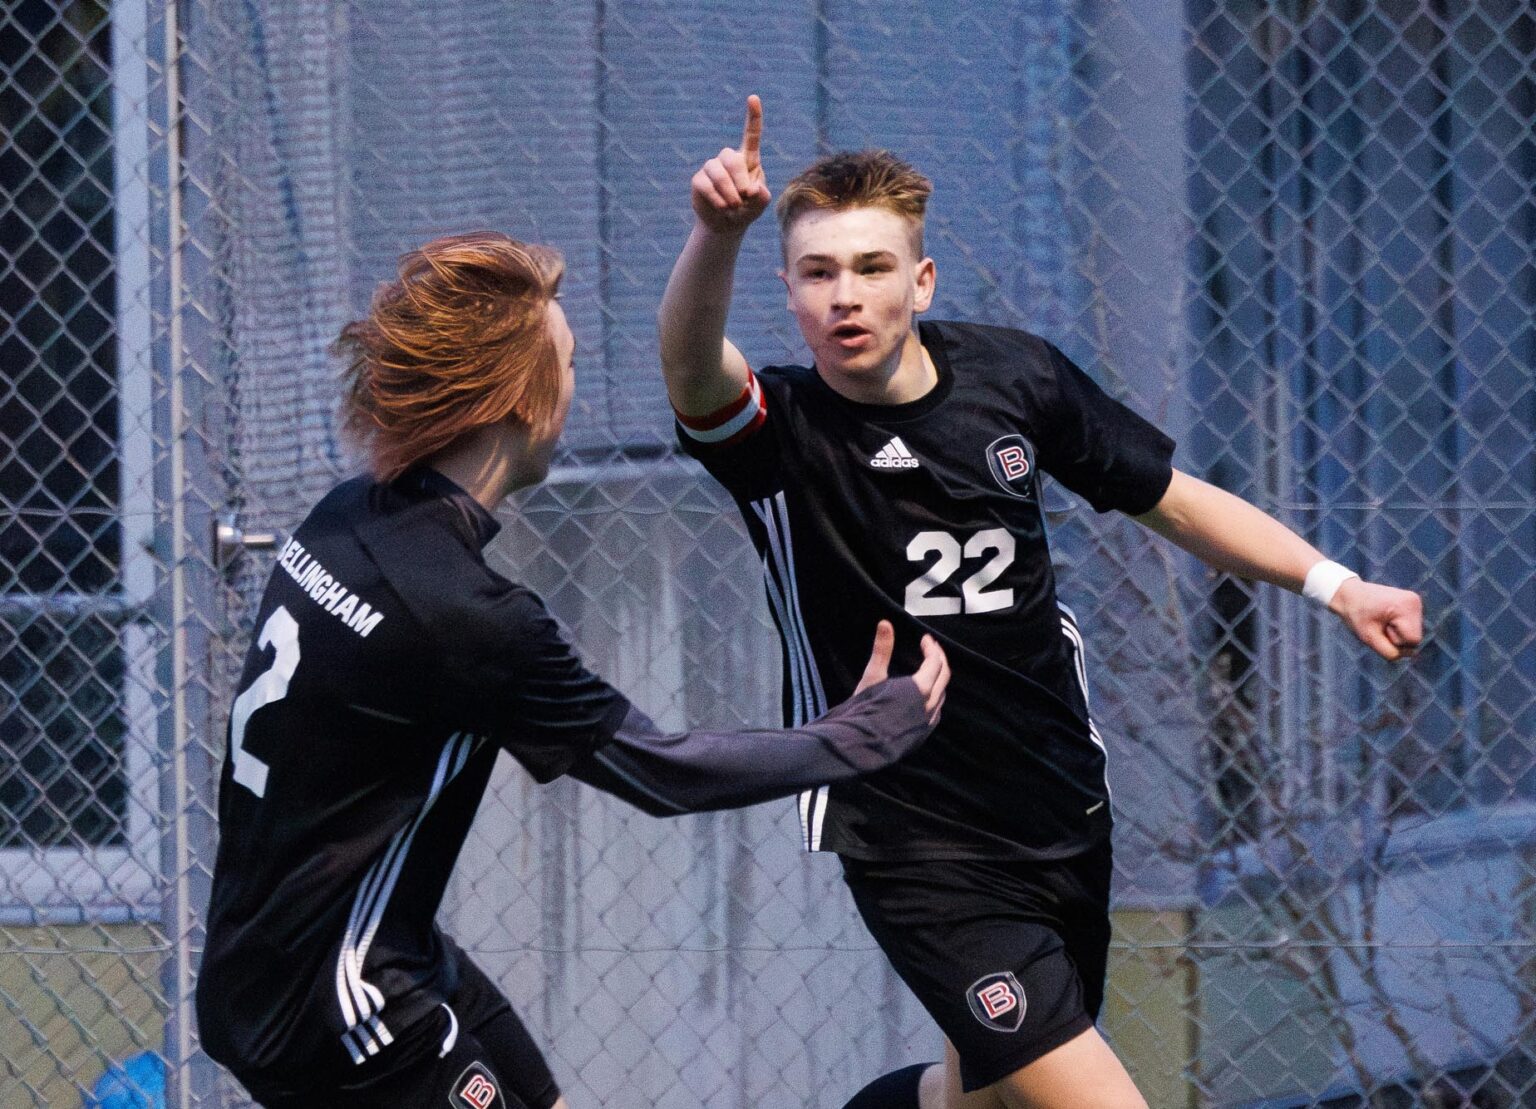 Bellingham's Judah Straight celebrates after scoring the second goal of his hat trick Saturday, March 23 during the Bayhawks' 4-2 win over Lynden in Bellingham.